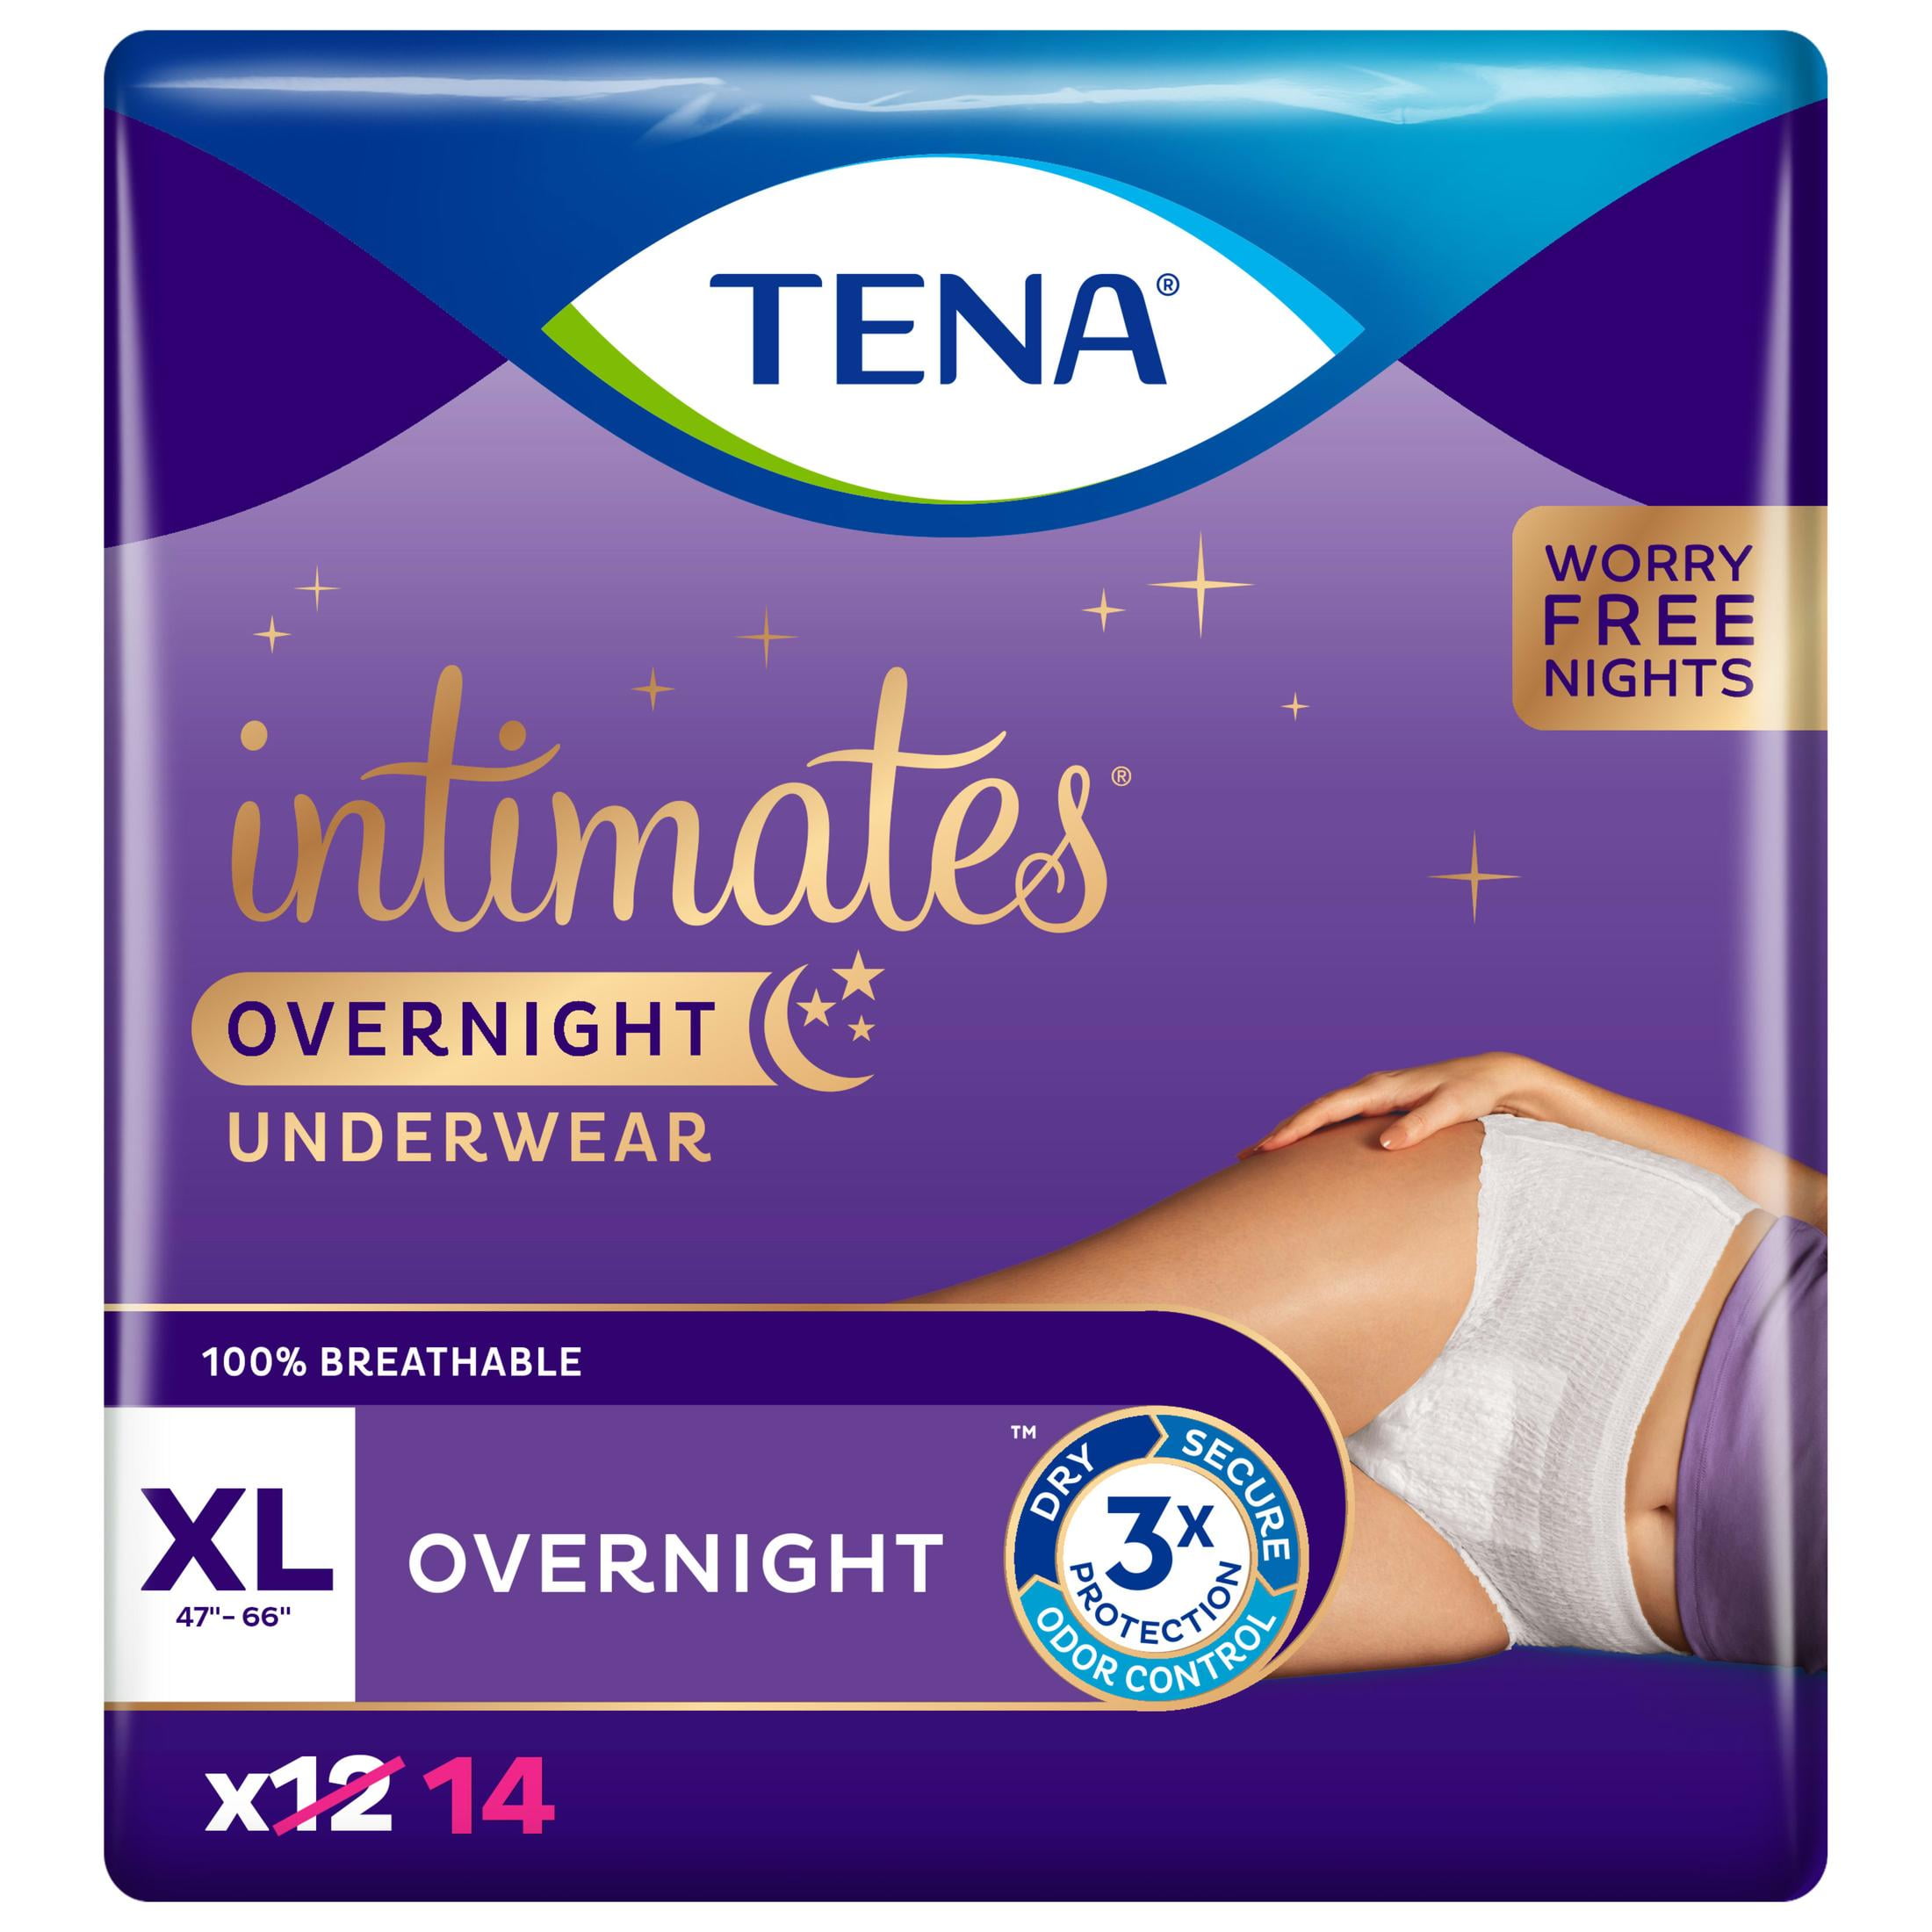 Tena Intimates Overnight Incontinence Protective Underwear, XLarge, 28 Count